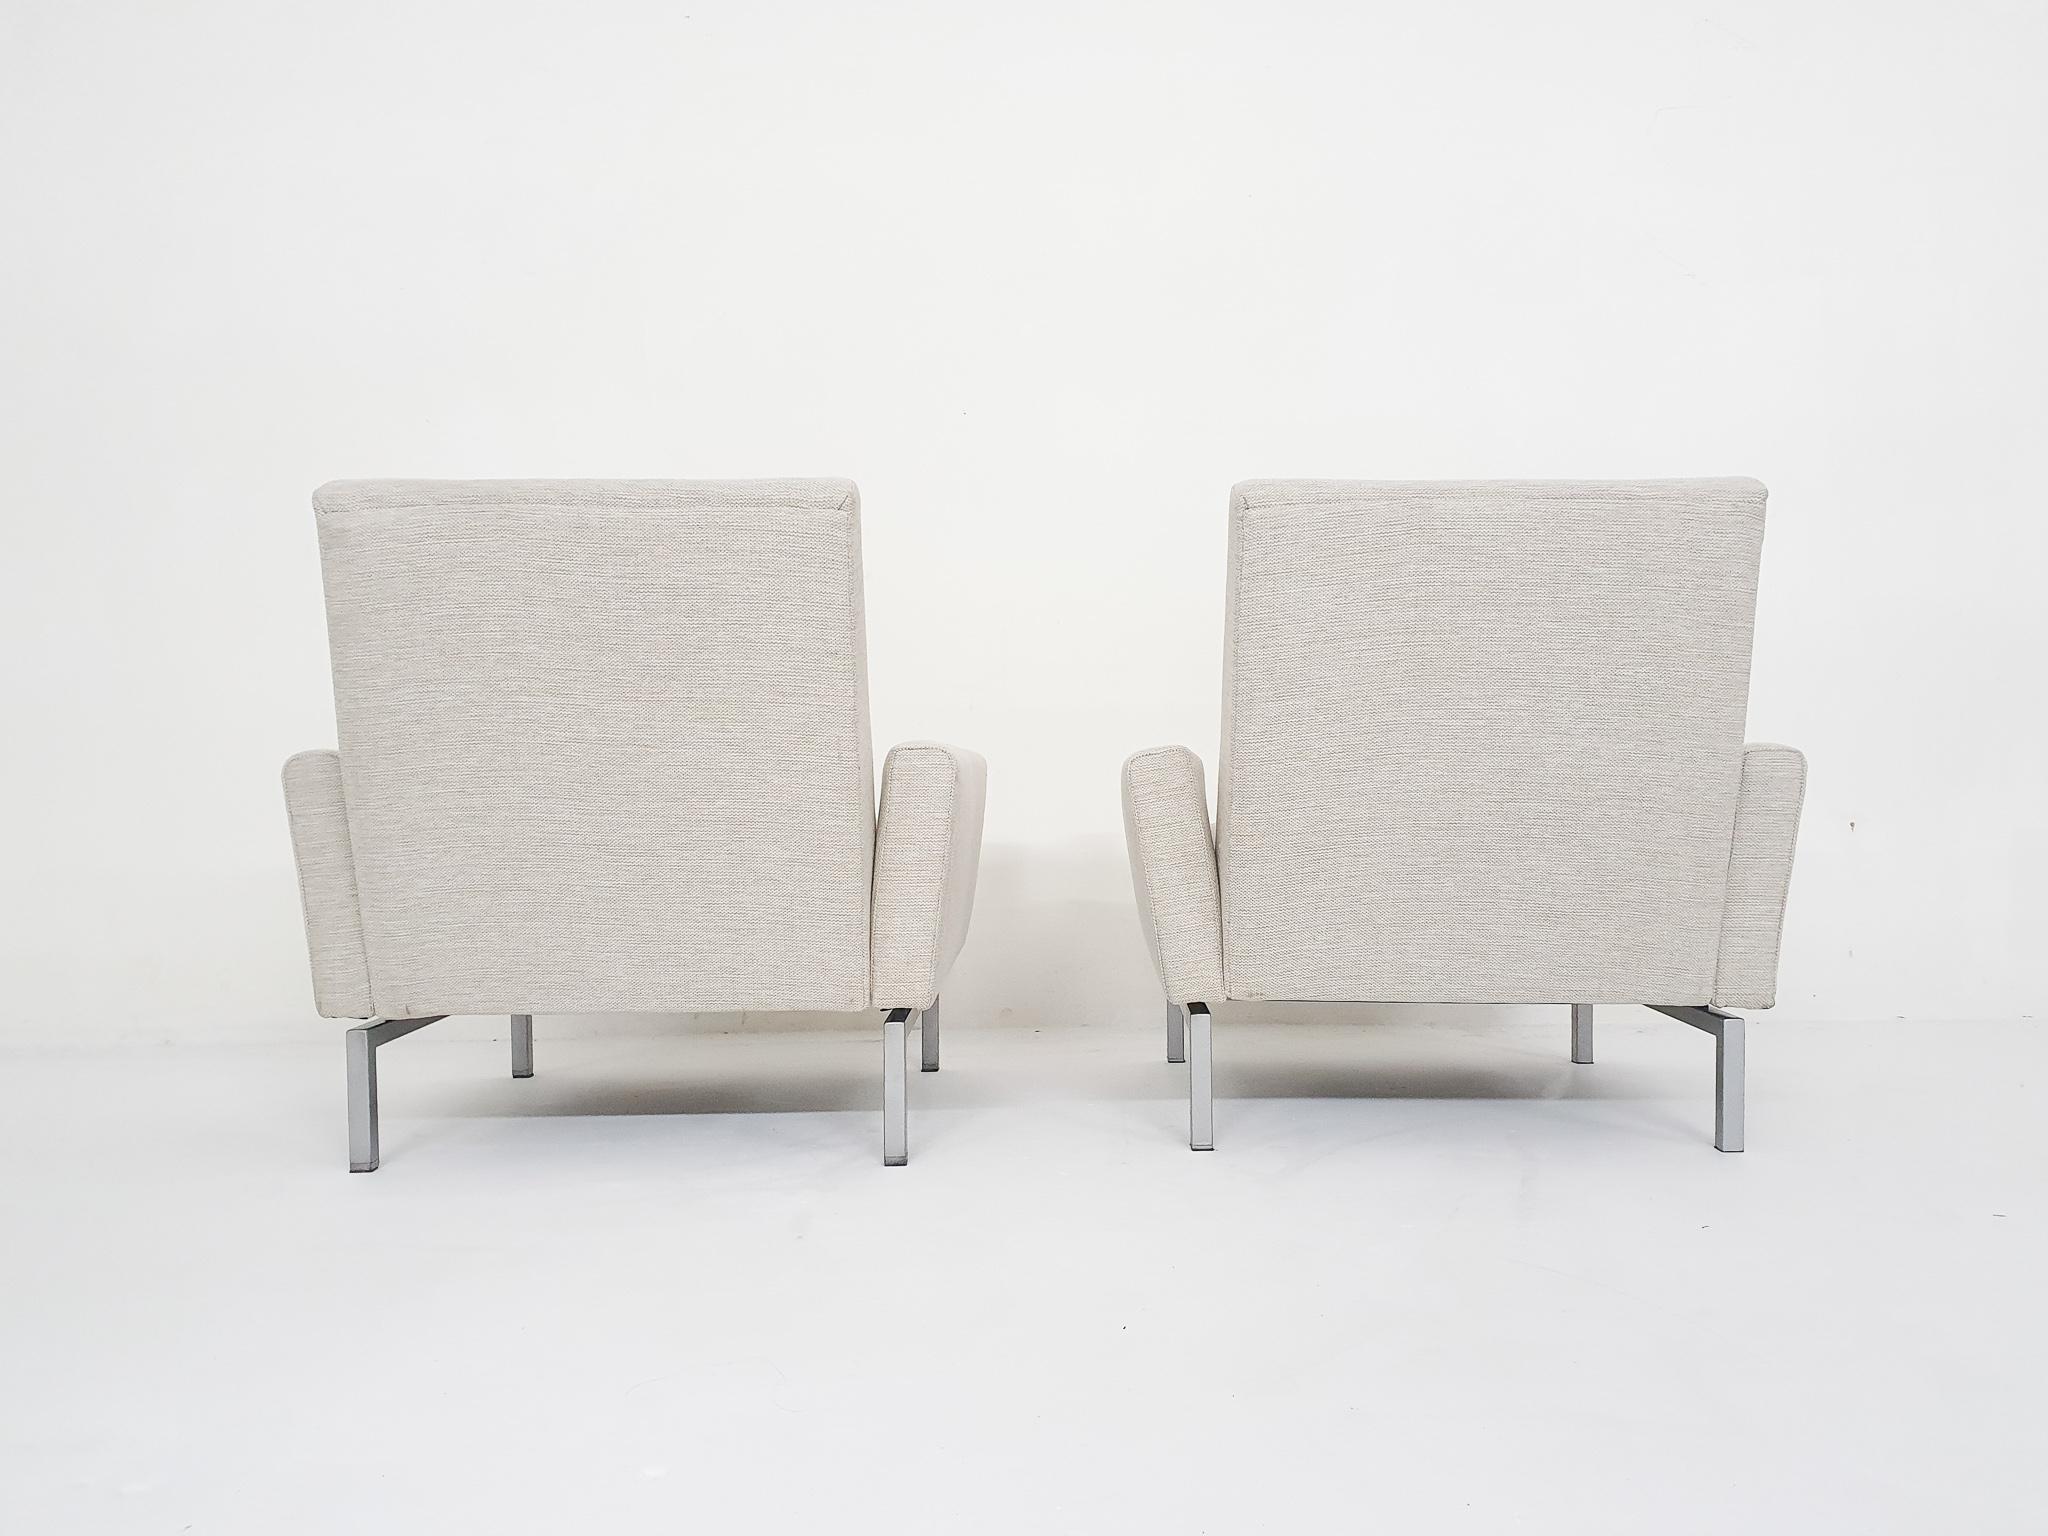 Set of Two Mid-Century Modern Lounge Chairs Attr. Artifort, The Netherlands 1950 In Good Condition For Sale In Amsterdam, NL